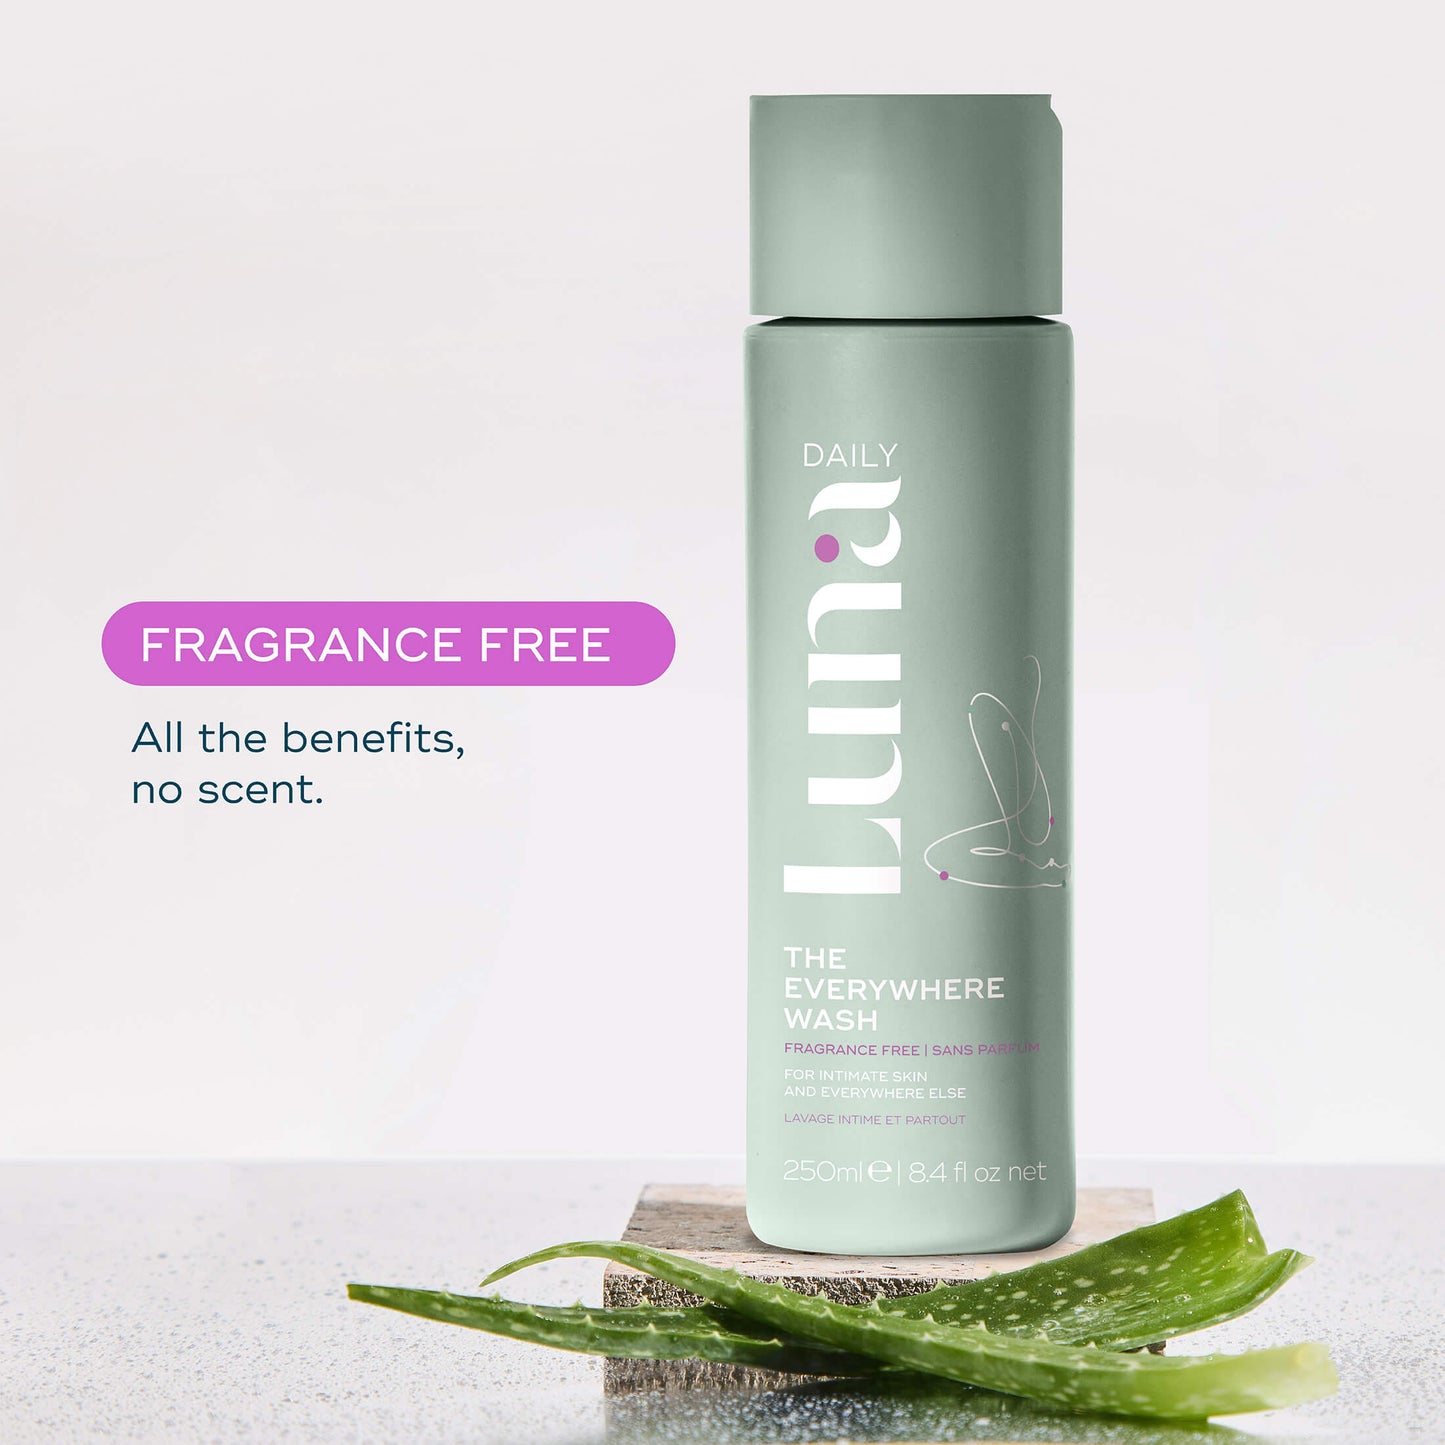 THE FRAGRANCE FREE DUO - FOR SENSITIVE SKIN